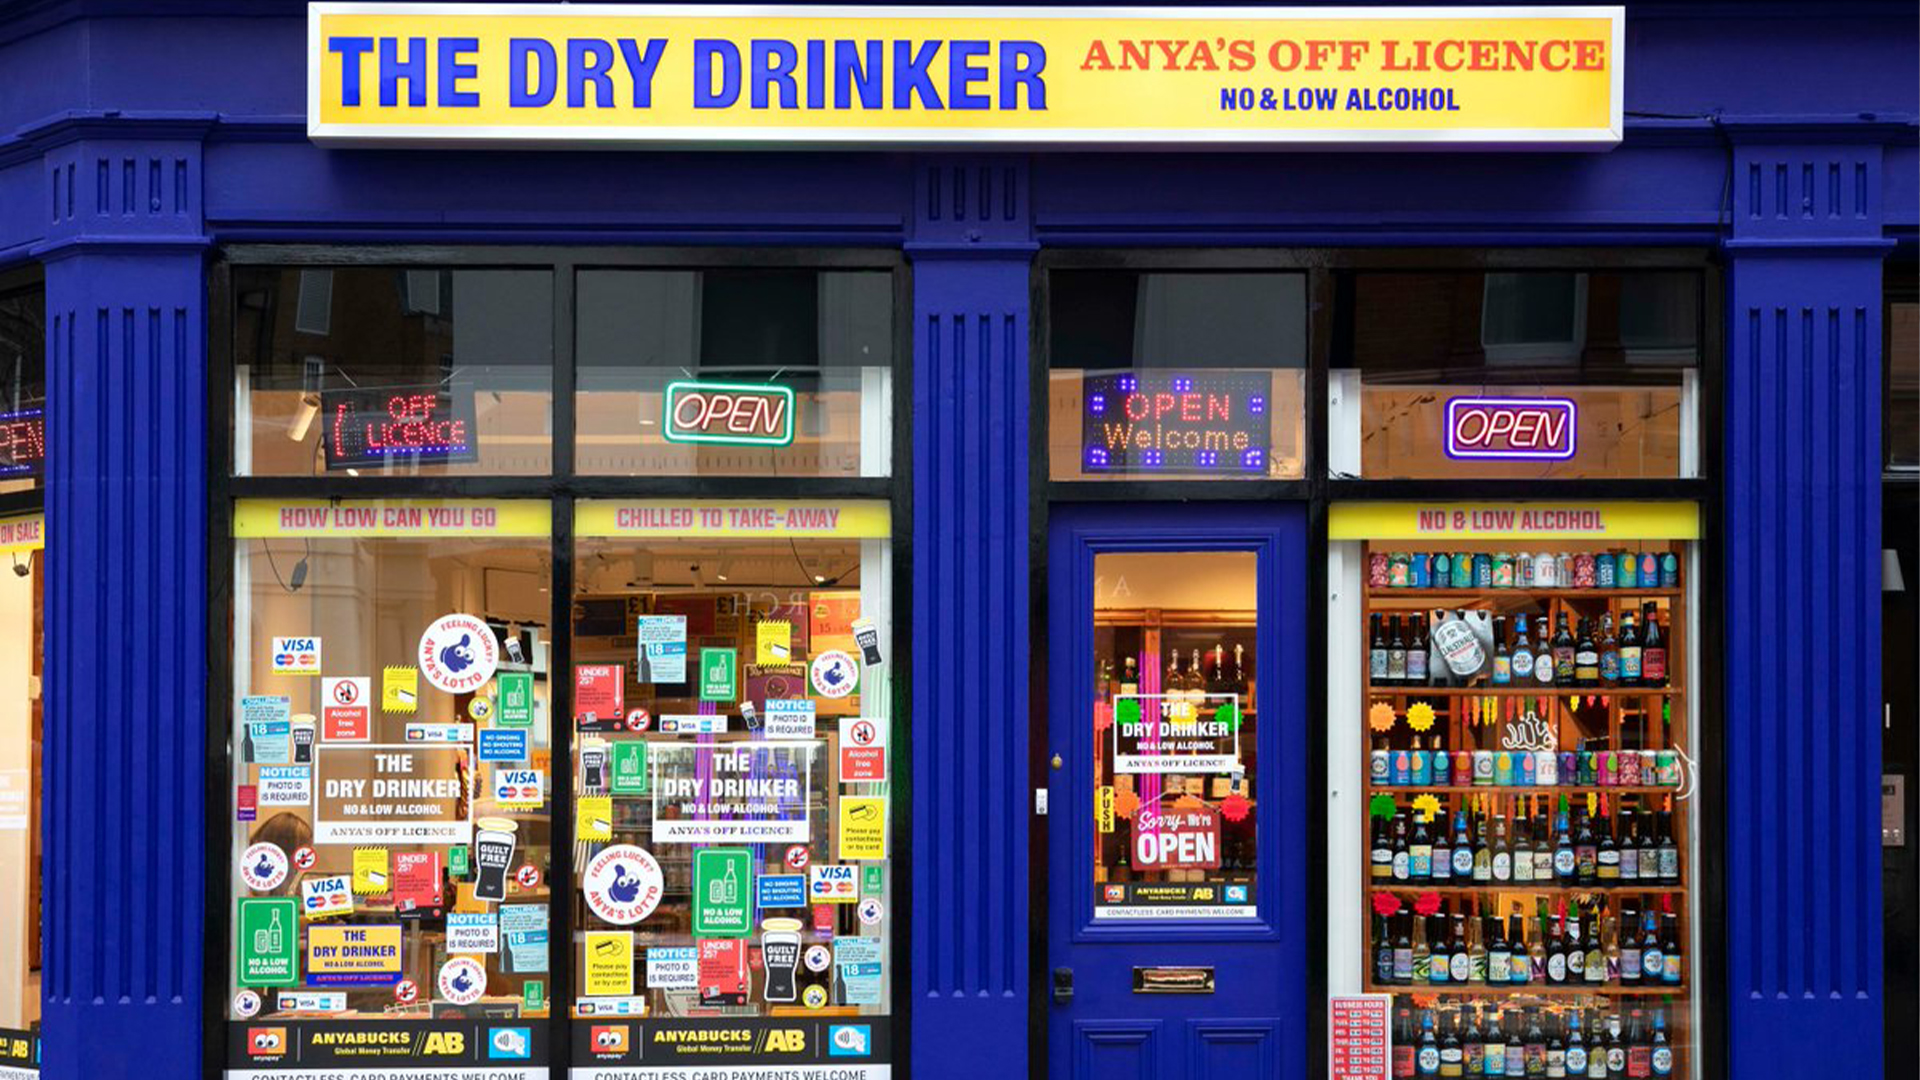 Anya Hindmarch Off Licence pop-up